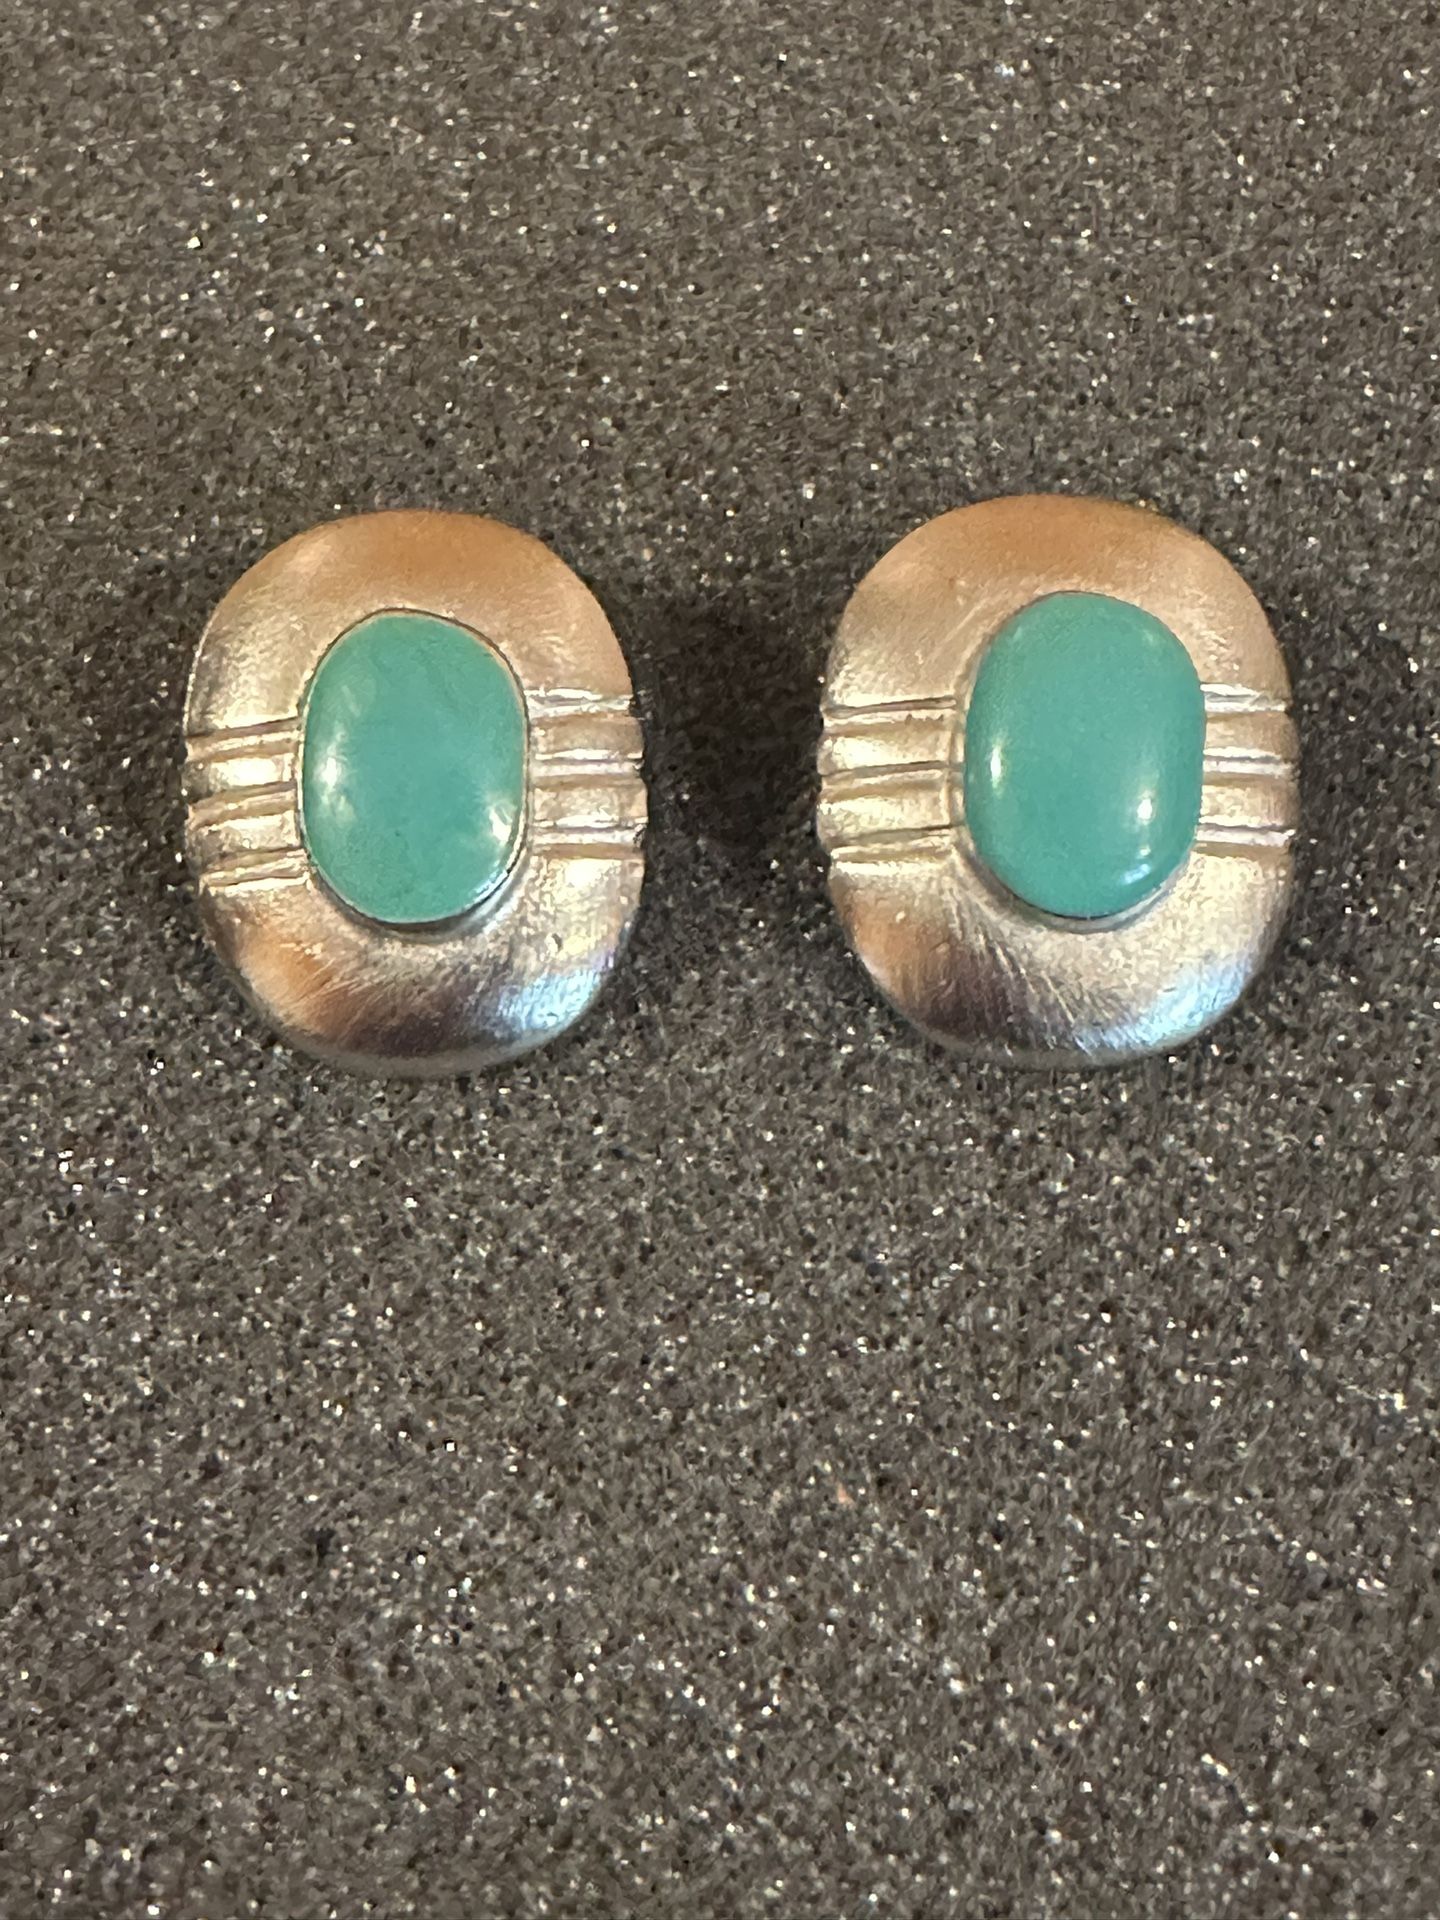 Vintage Turquoise Clip on Earrings by Kenneth Lane